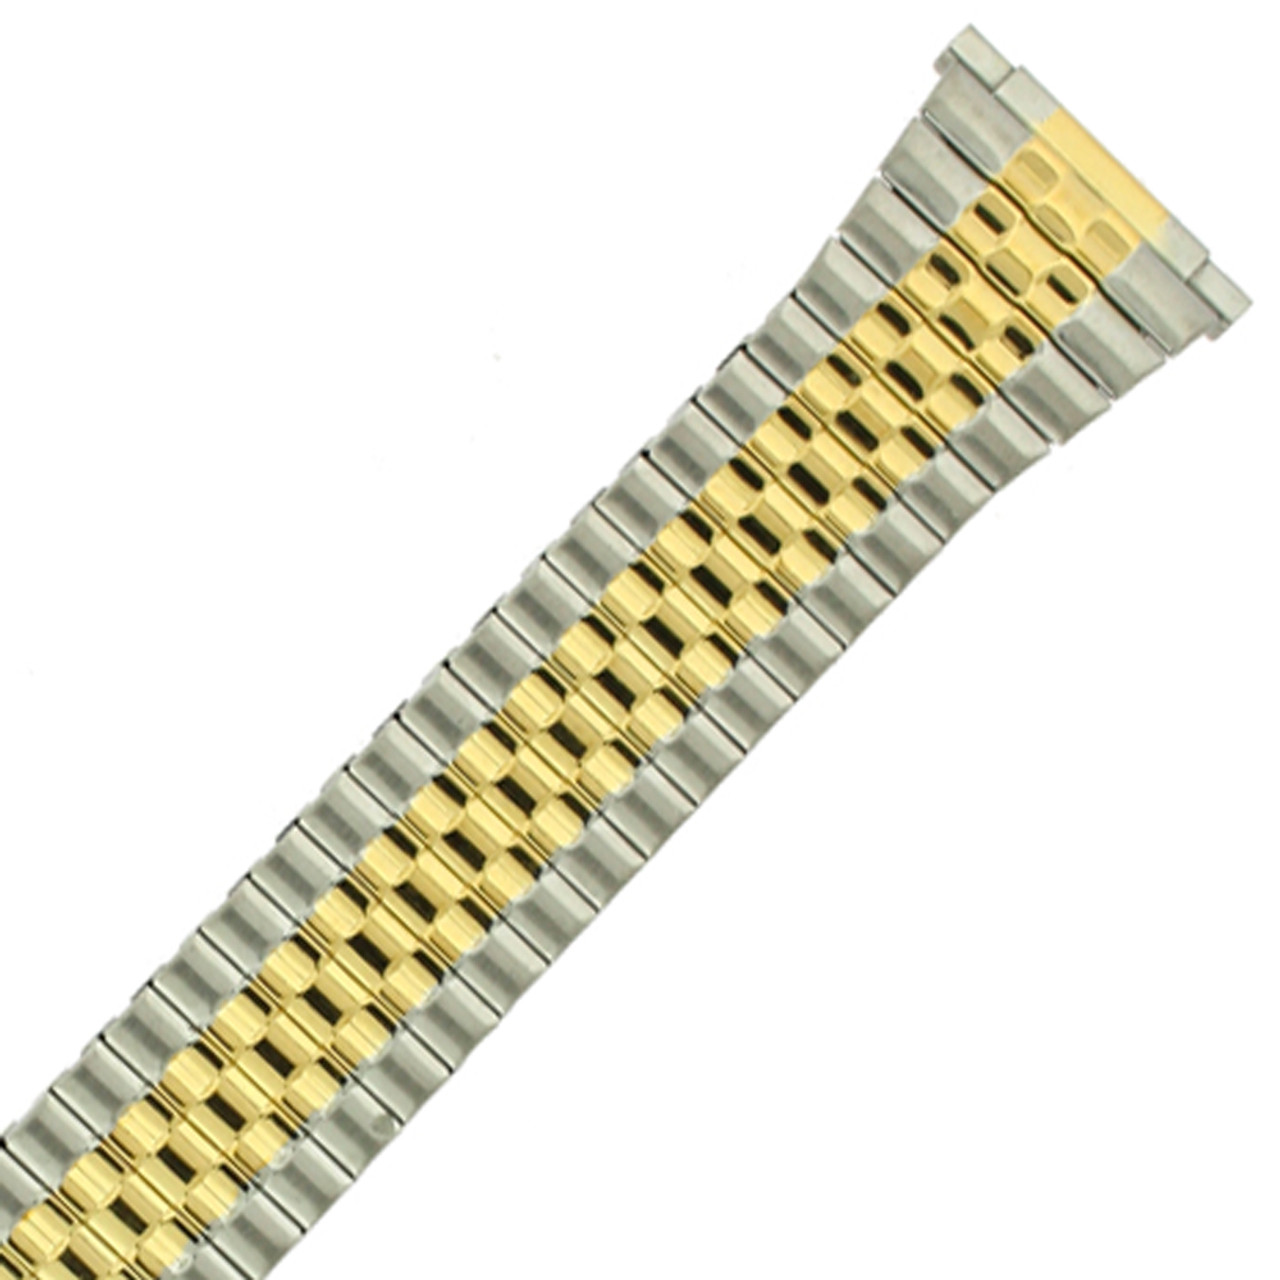 Watch Band Expansion Metal Stretch Two tone Silver-Gold fits 16mm to 20mm